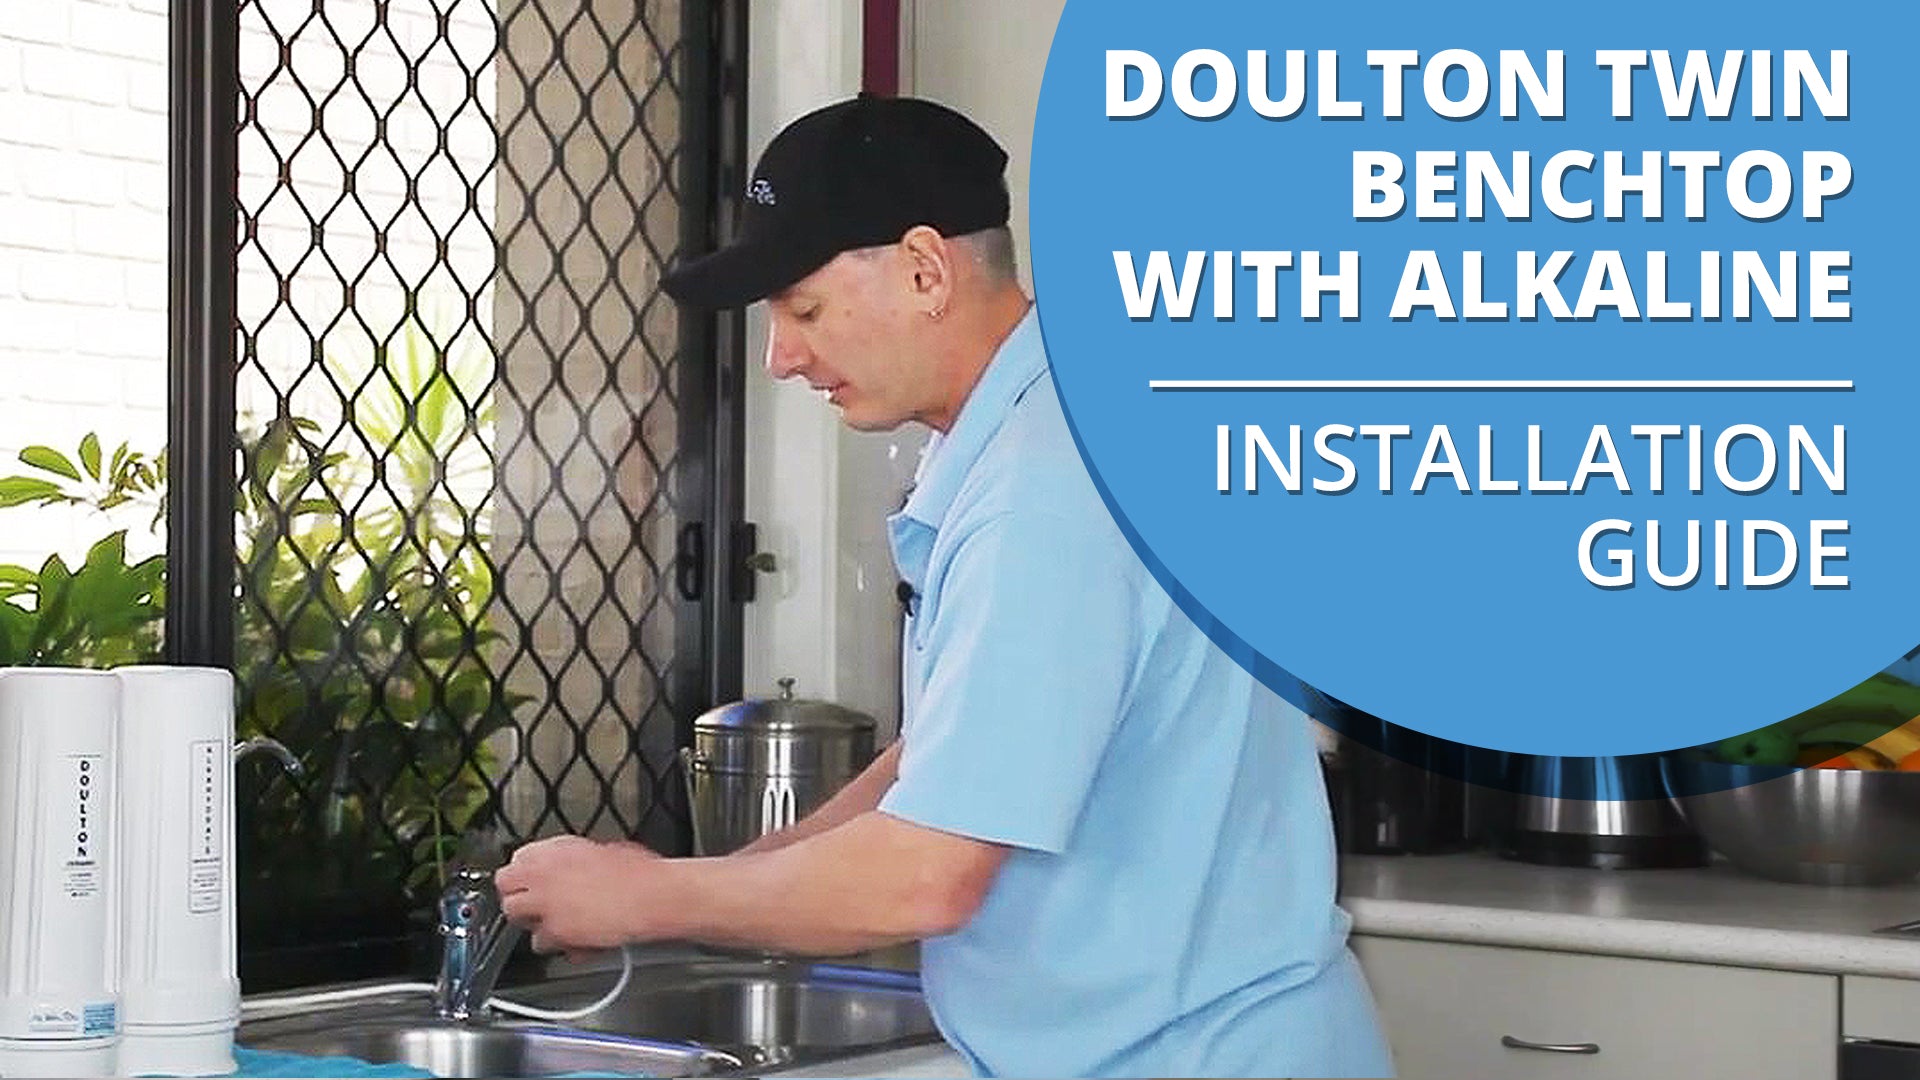 [VIDEO] How to install your Doulton Ultracarb 0.5 Micron 10" Twin Benchtop Water Filter with Alkaline